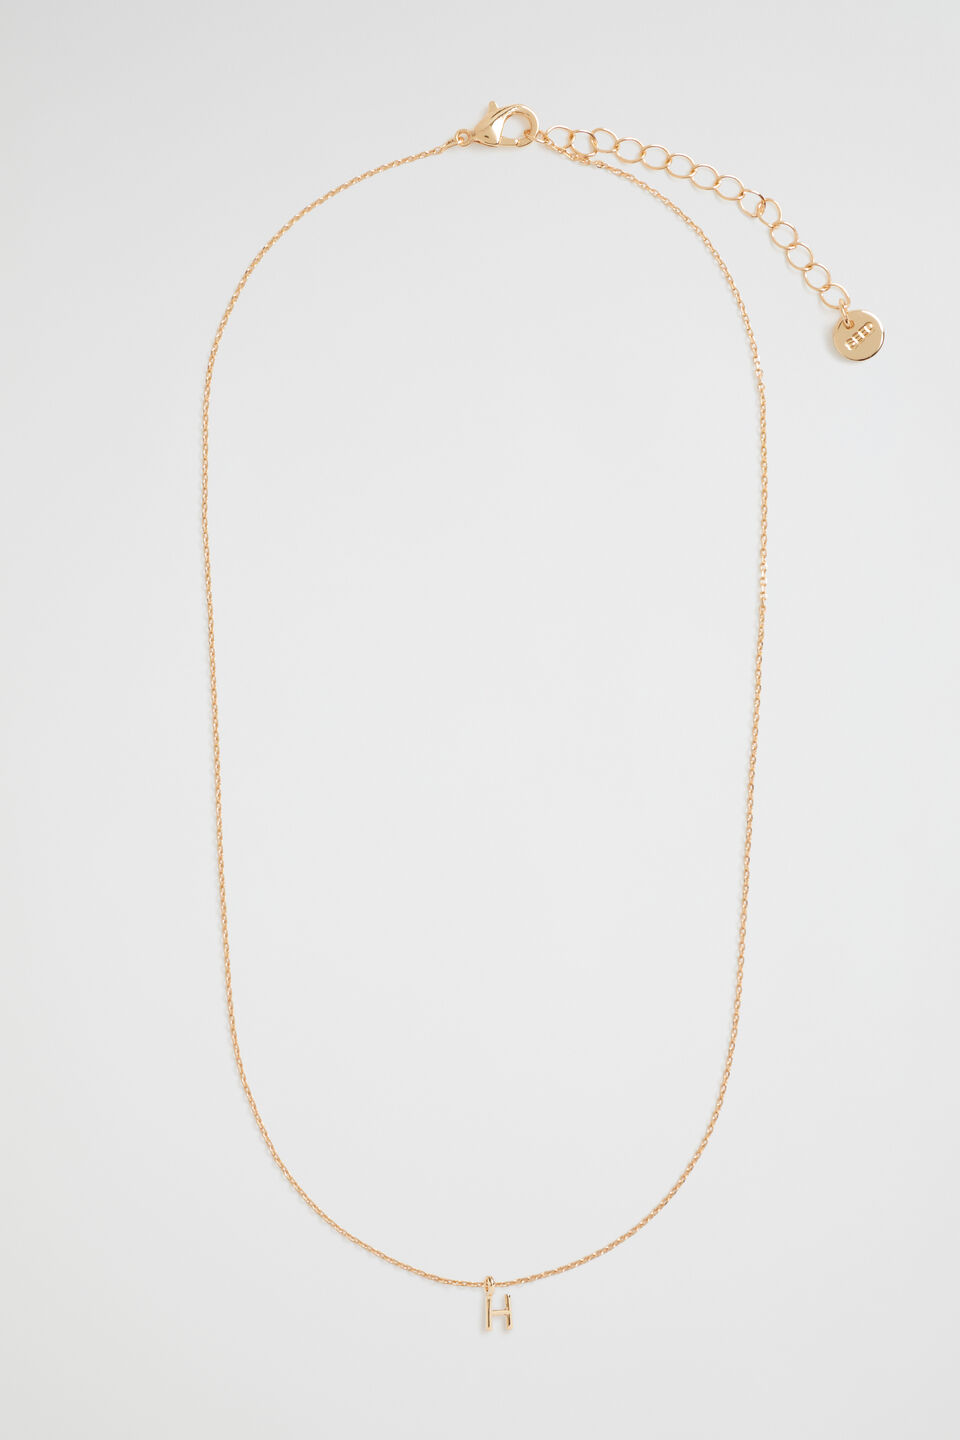 Gold Initial Necklace  H